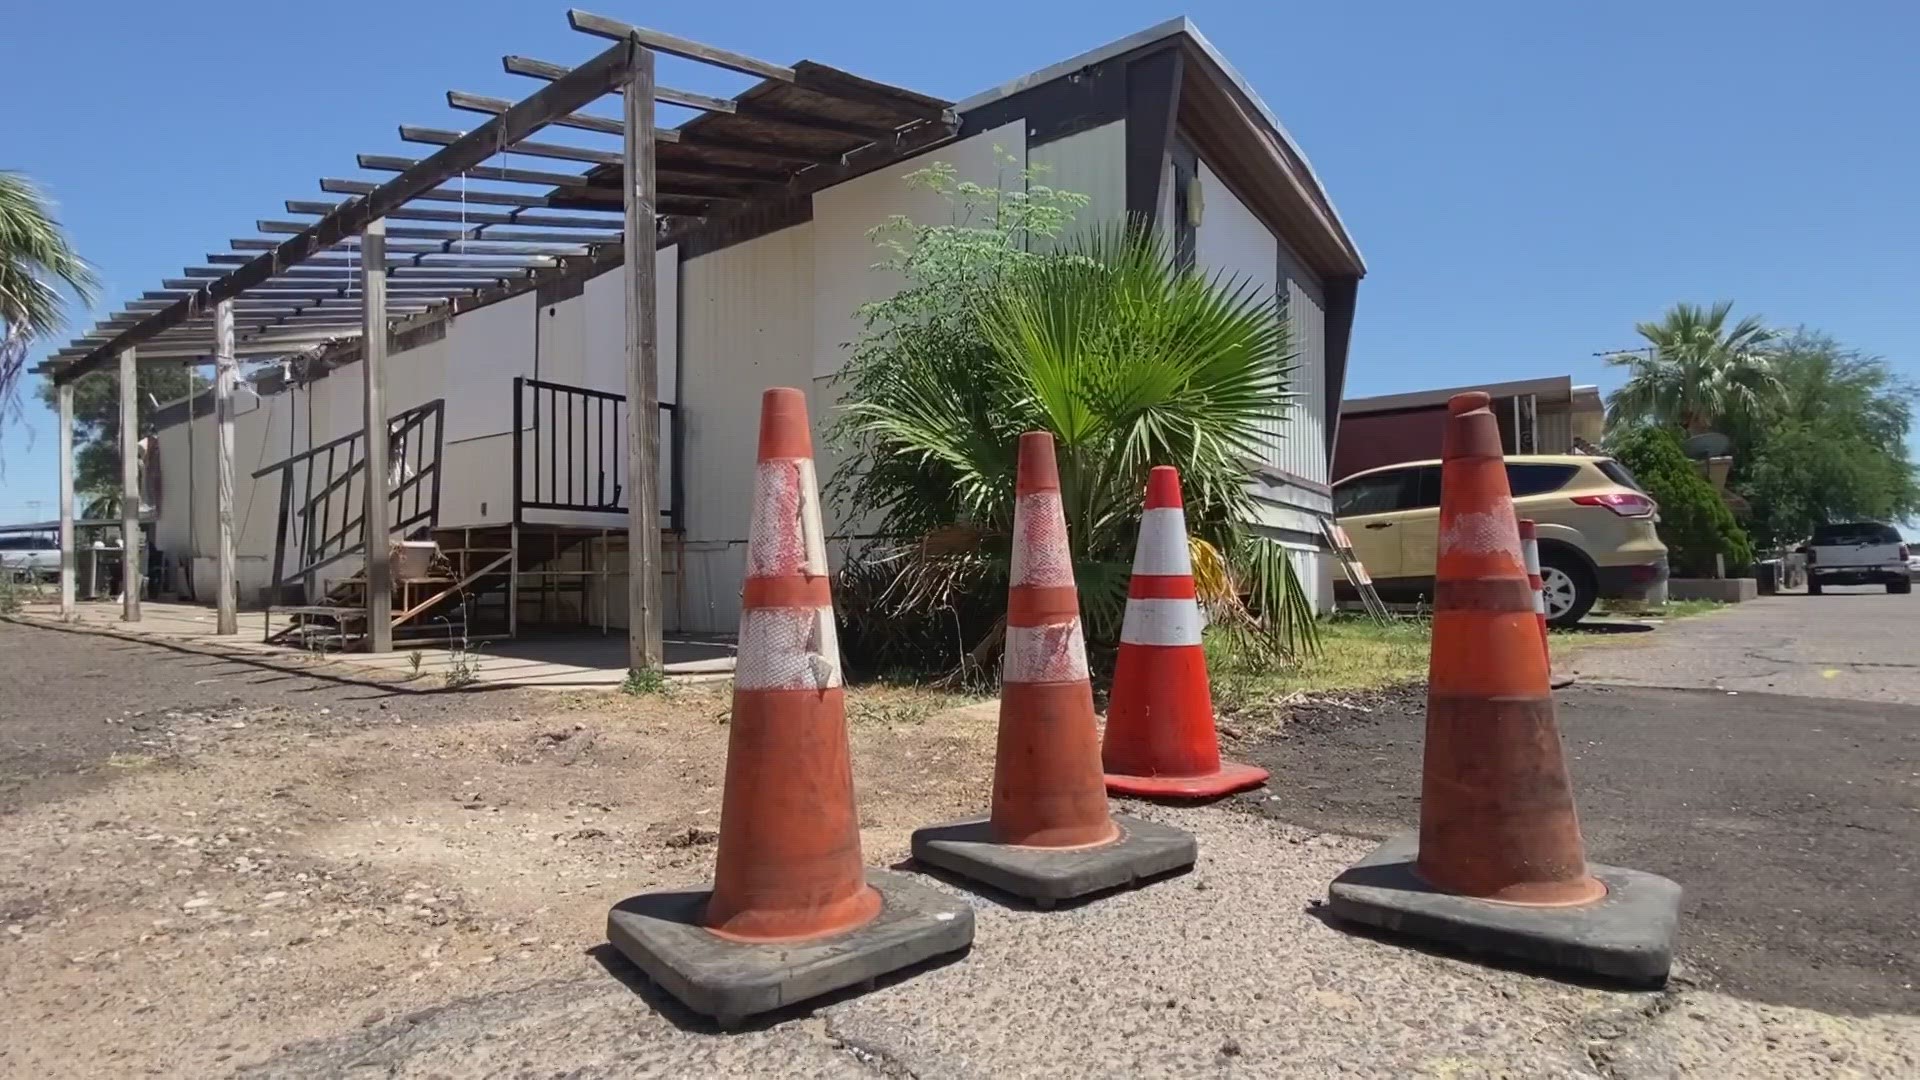 Mobile home residents in Glendale worry as time comes to leave home. Grand Canyon University says it will work with each family to find a solution